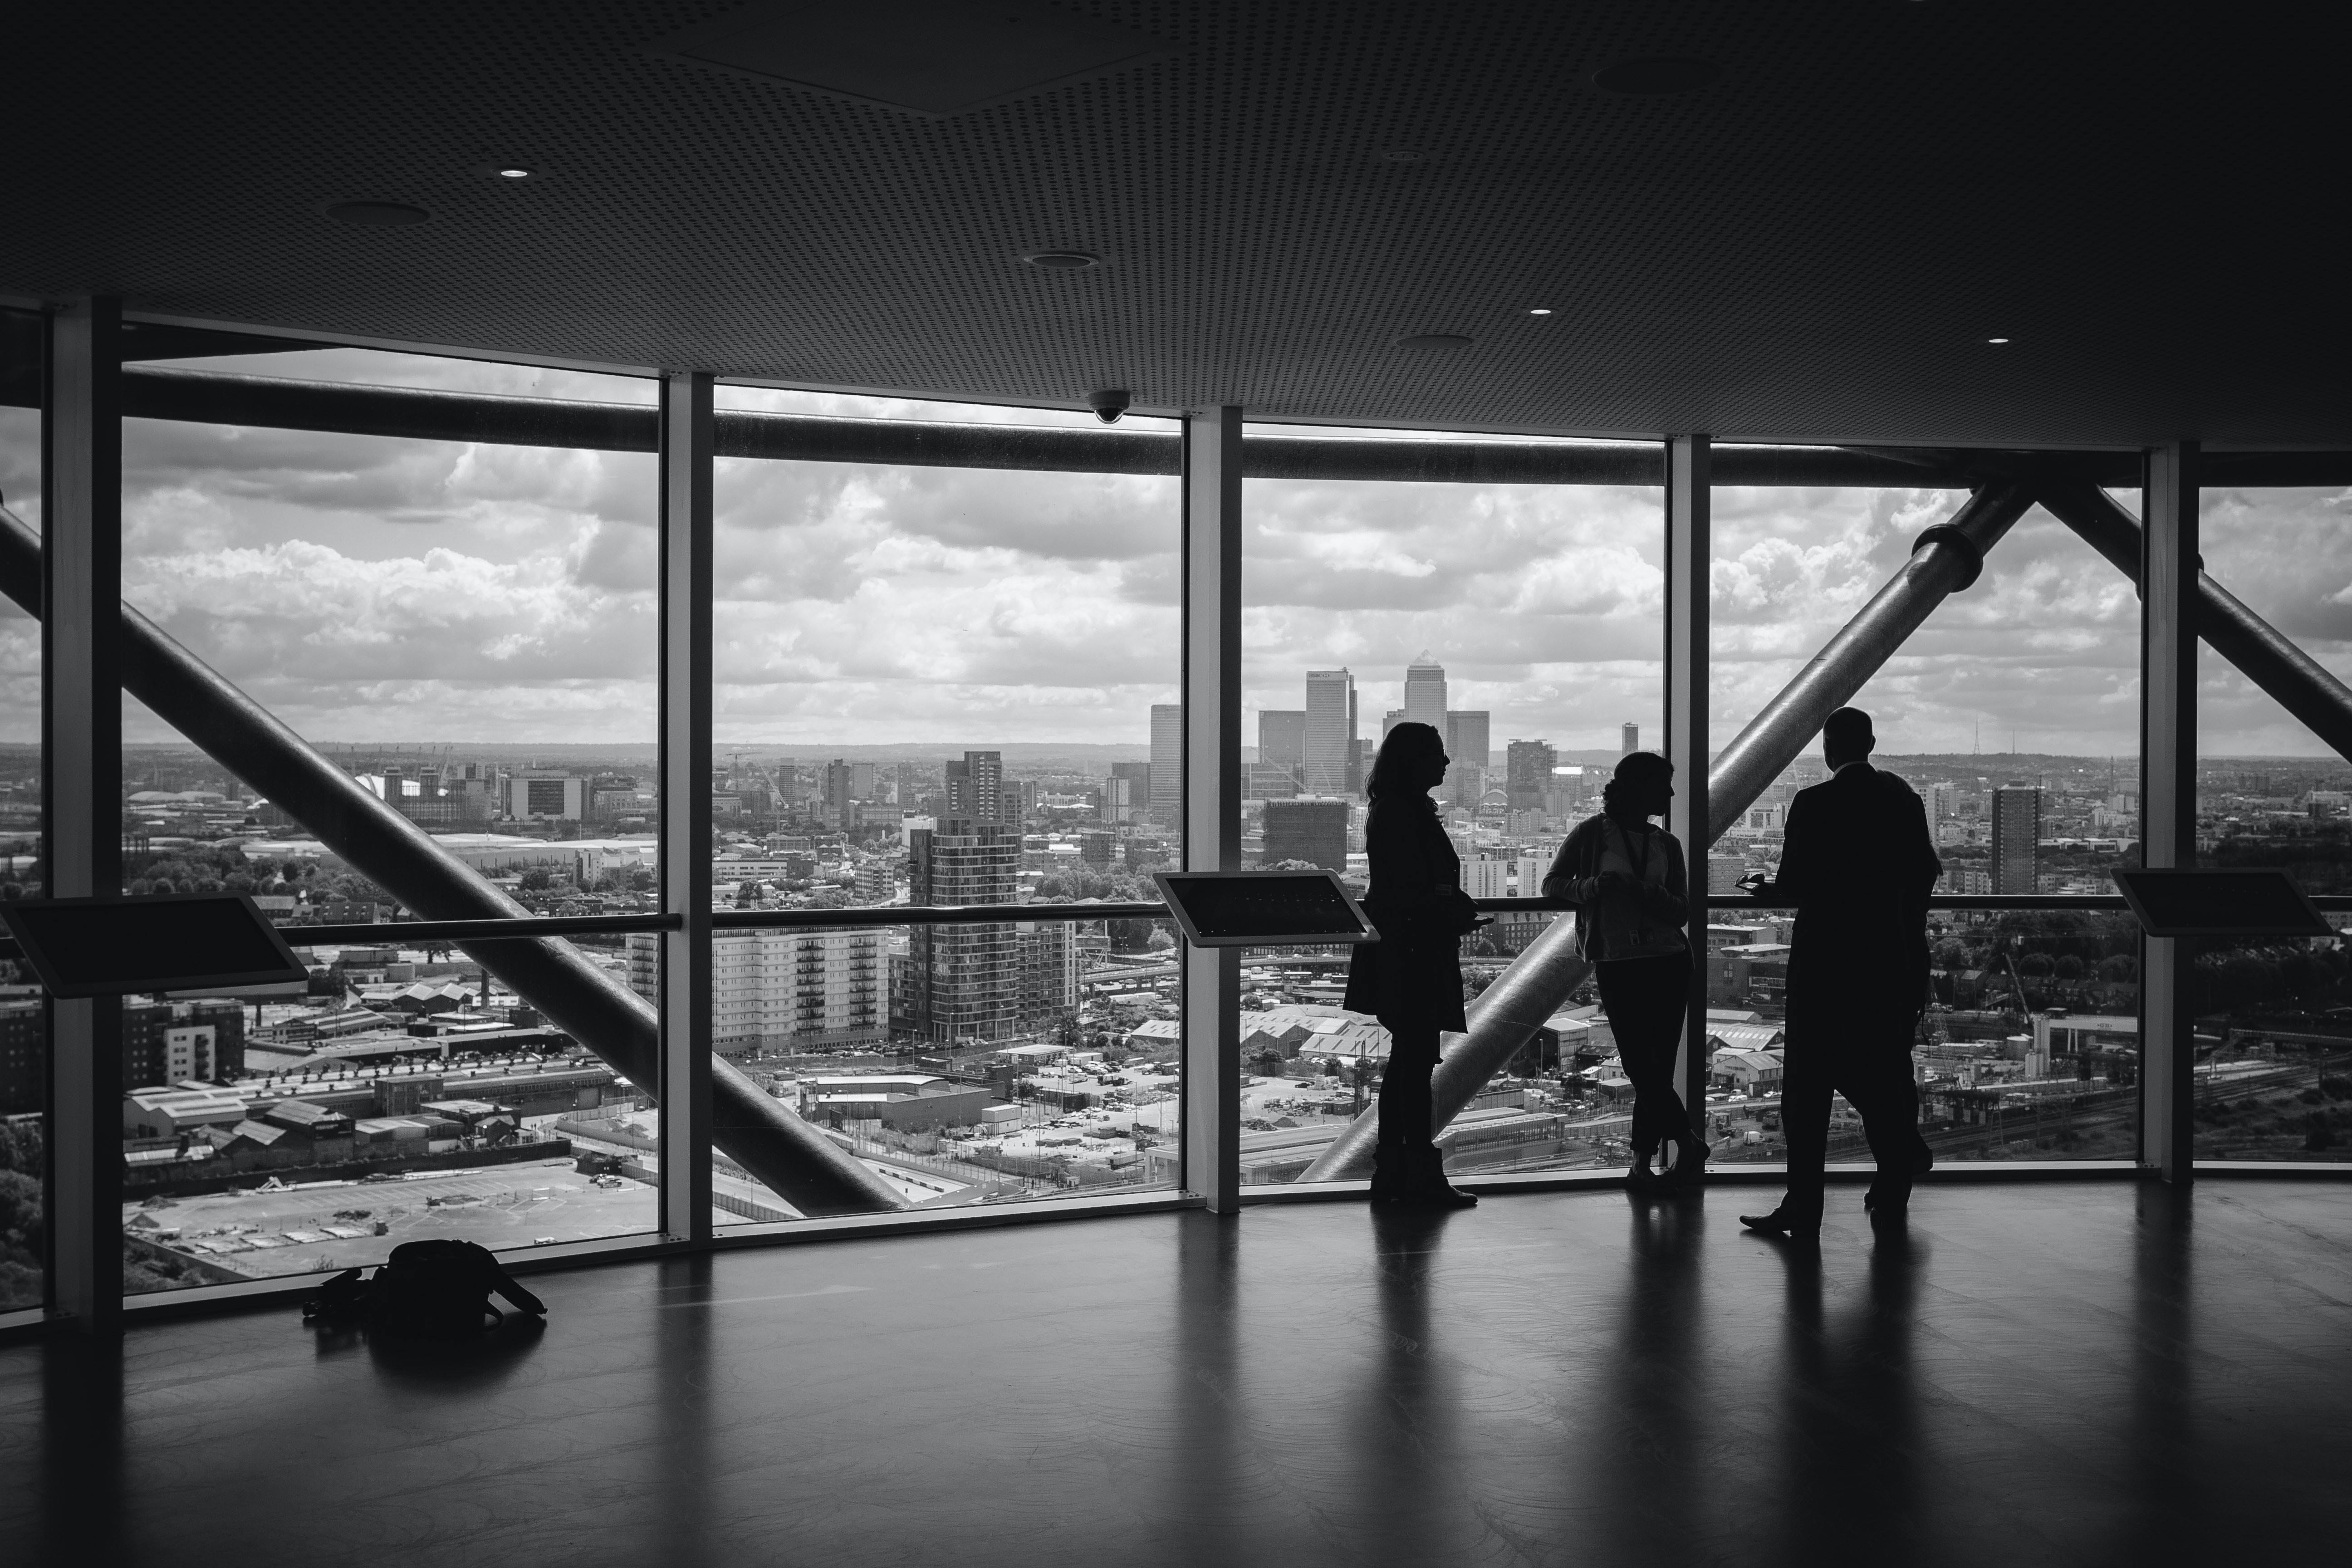 A picture of 3 people in a corporate meeting with a view of a city skyline captured and edited beautifully, shared by Charles Forerunner on Unsplash.